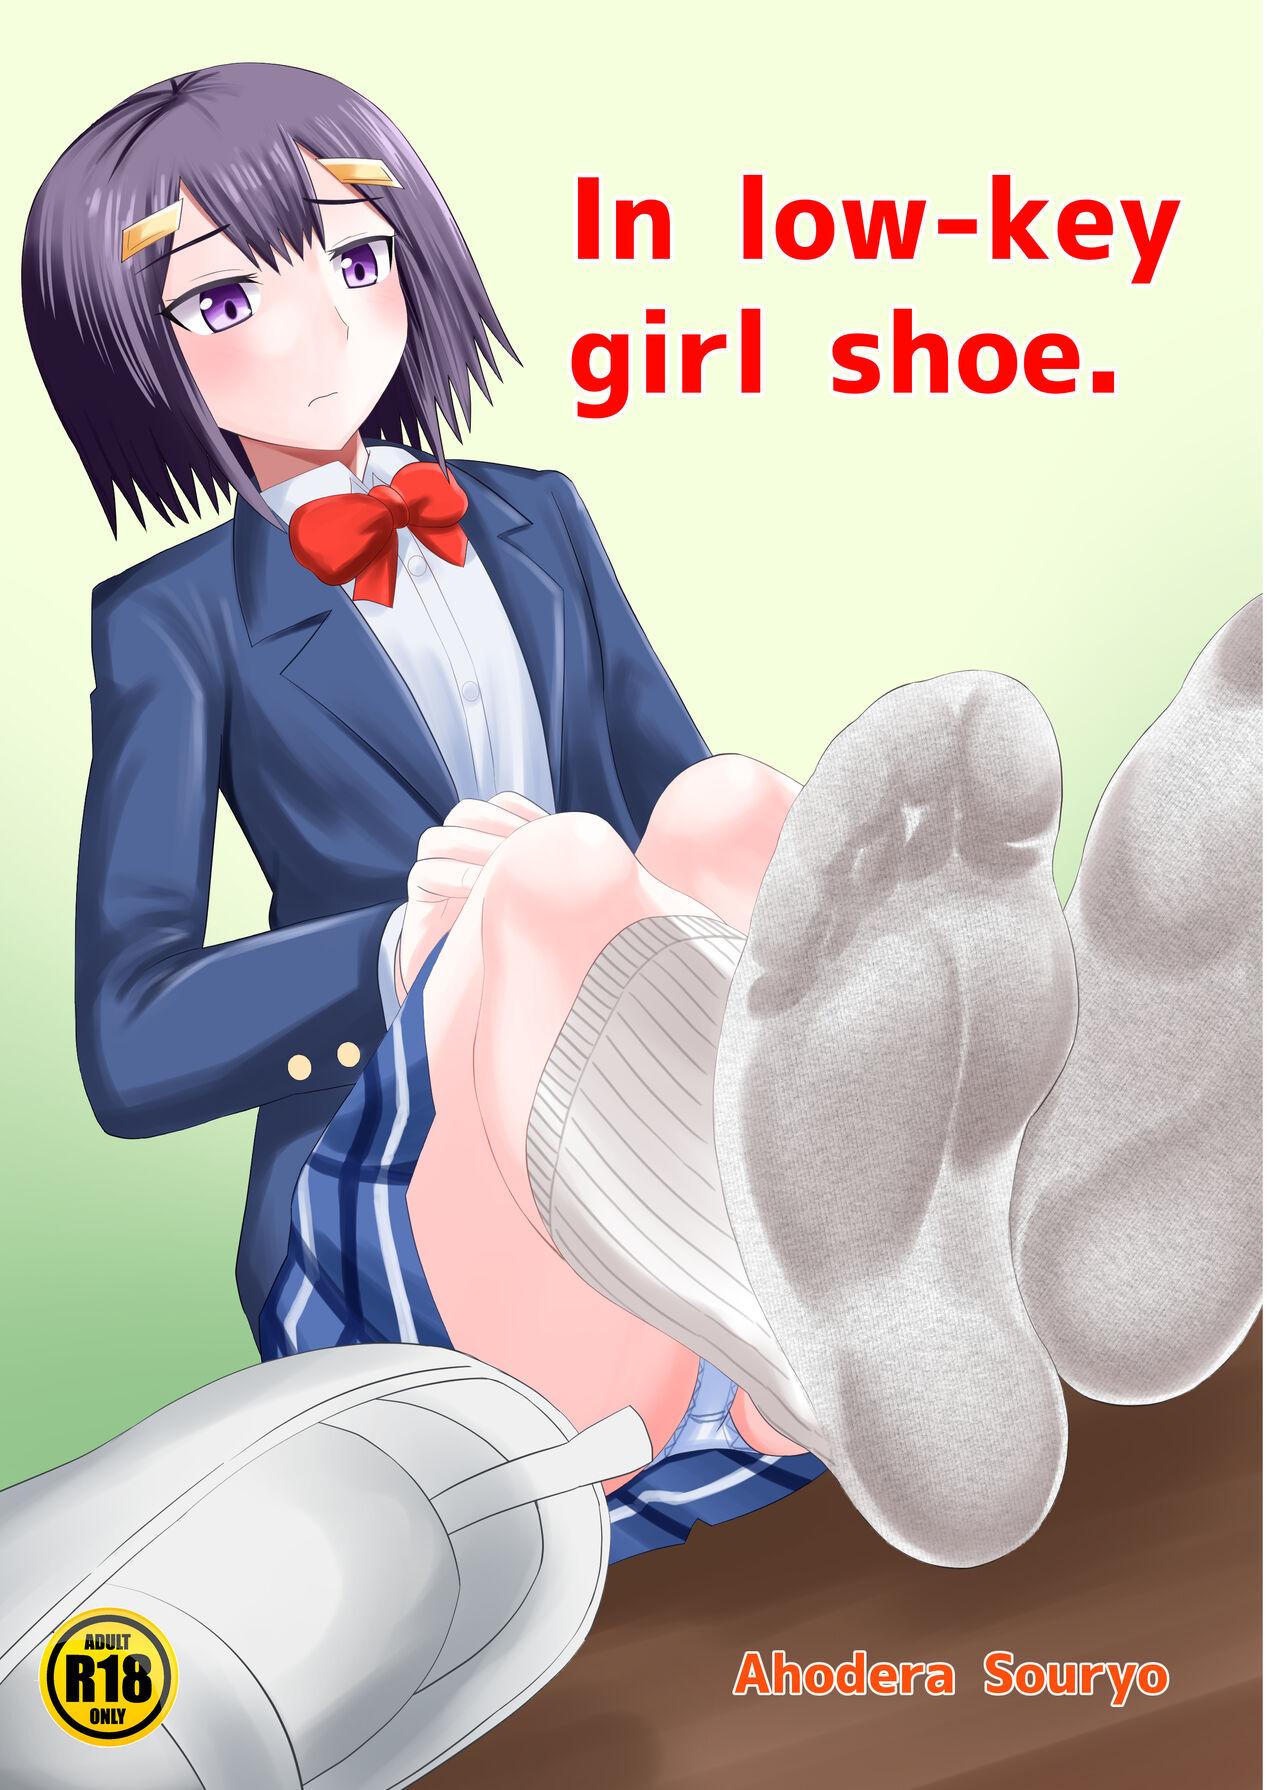 In the shoes of a Plain Girl 0